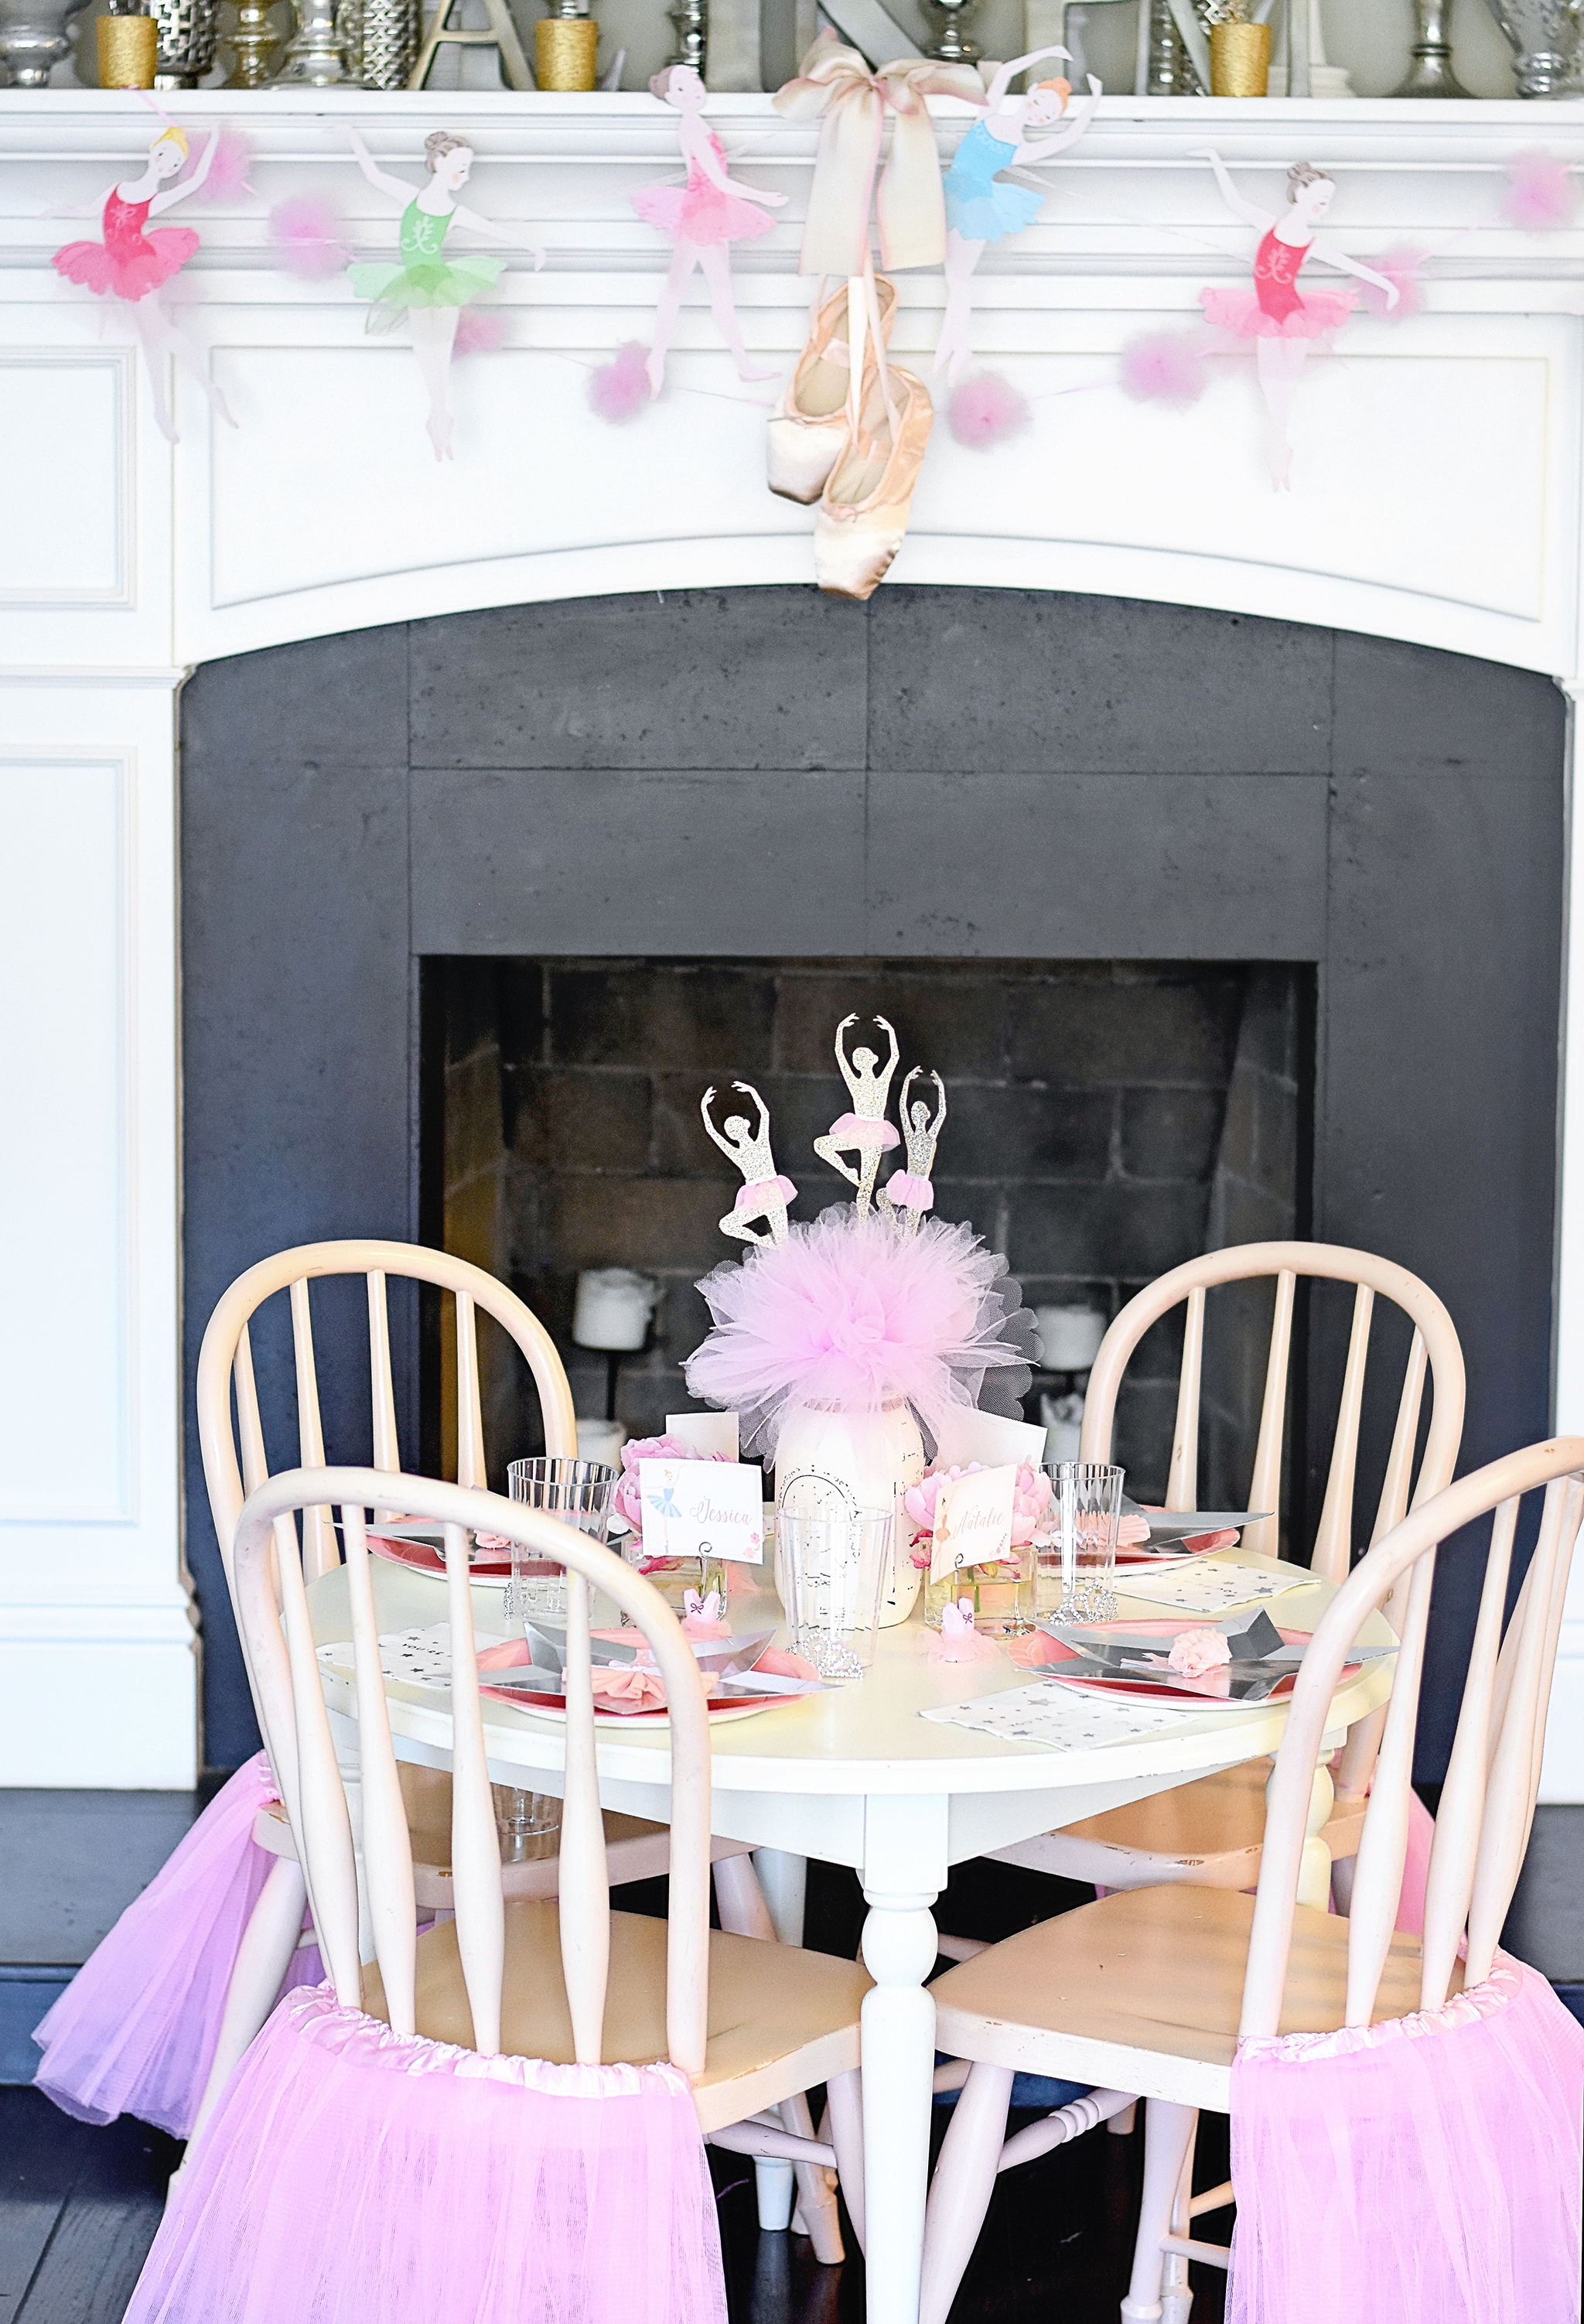 Set the scene with gorgeous and girl ballet decor!